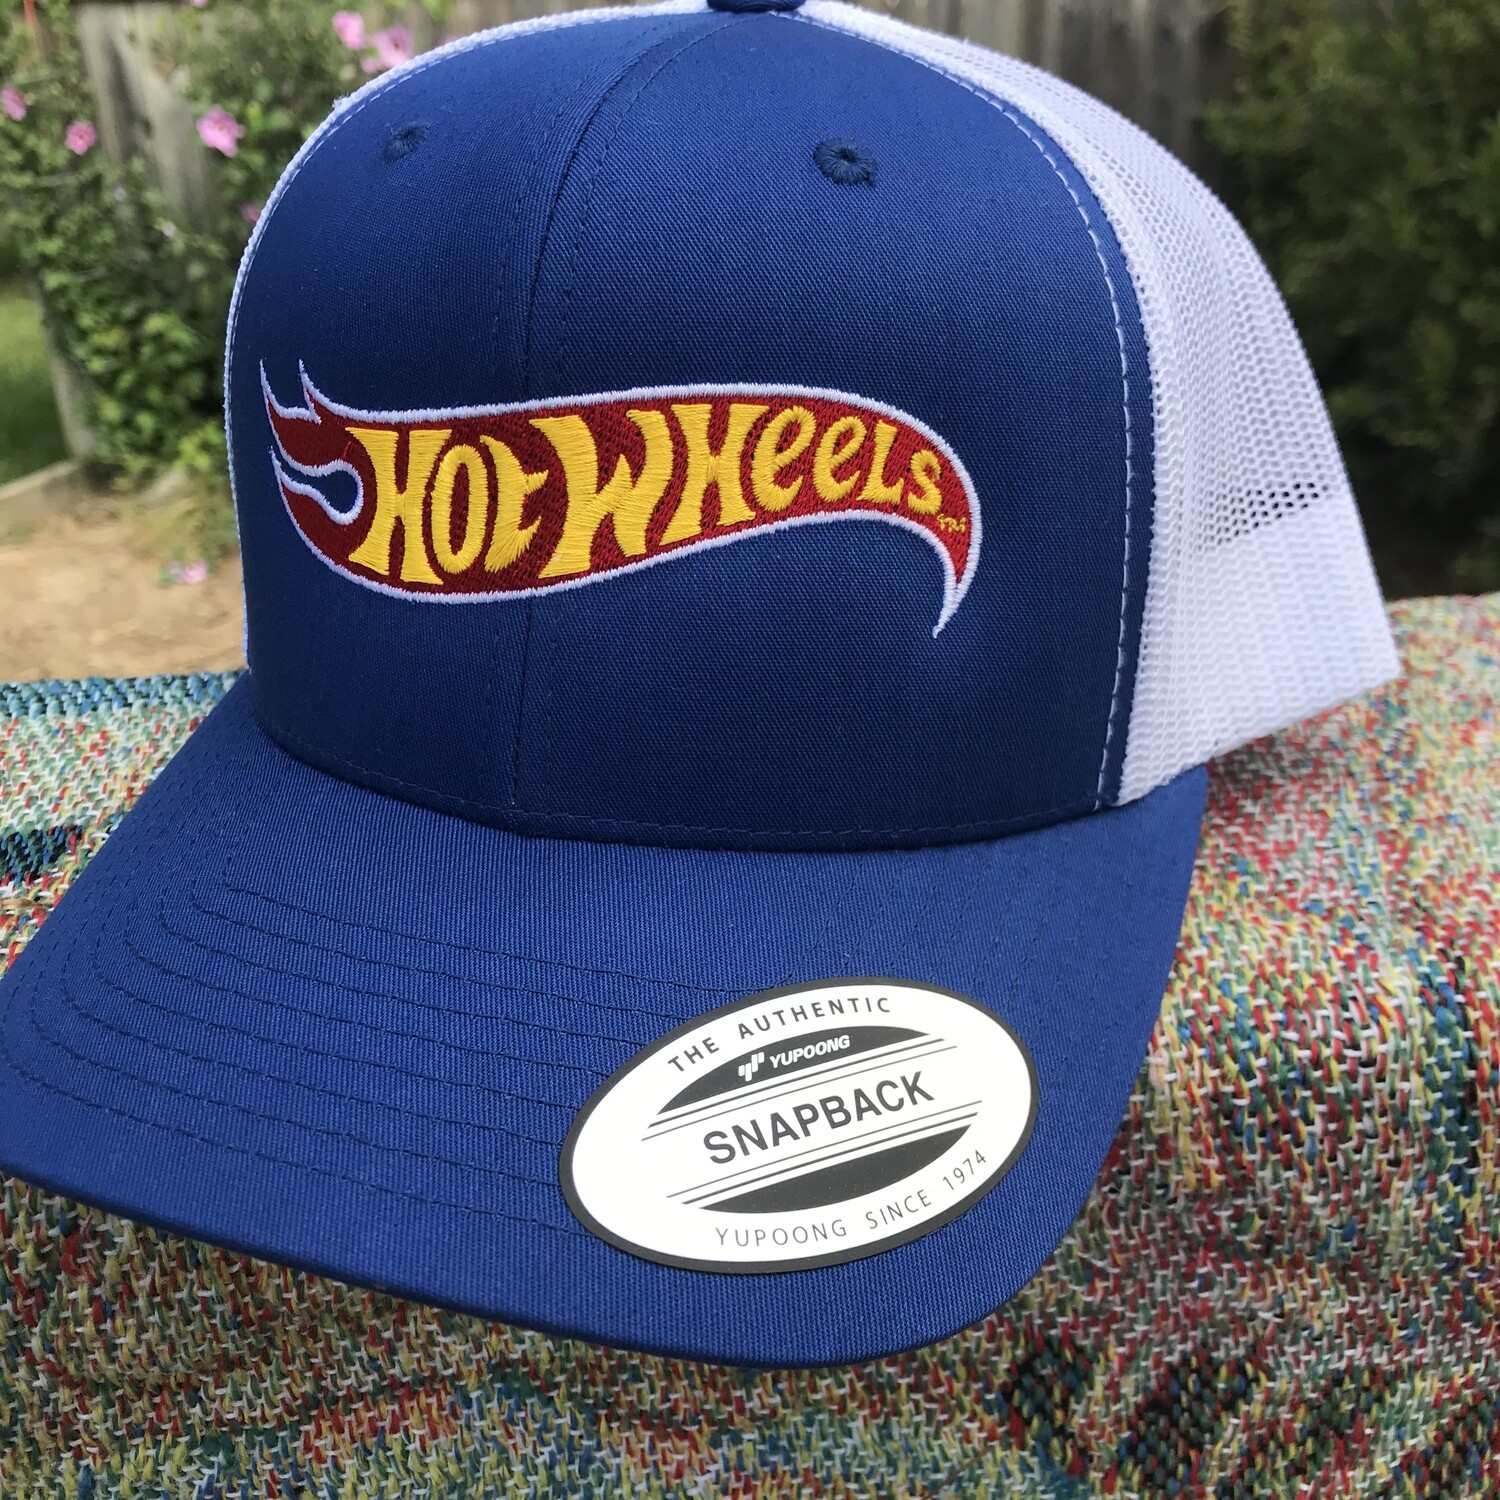 Hot Wheels embroidered hat.